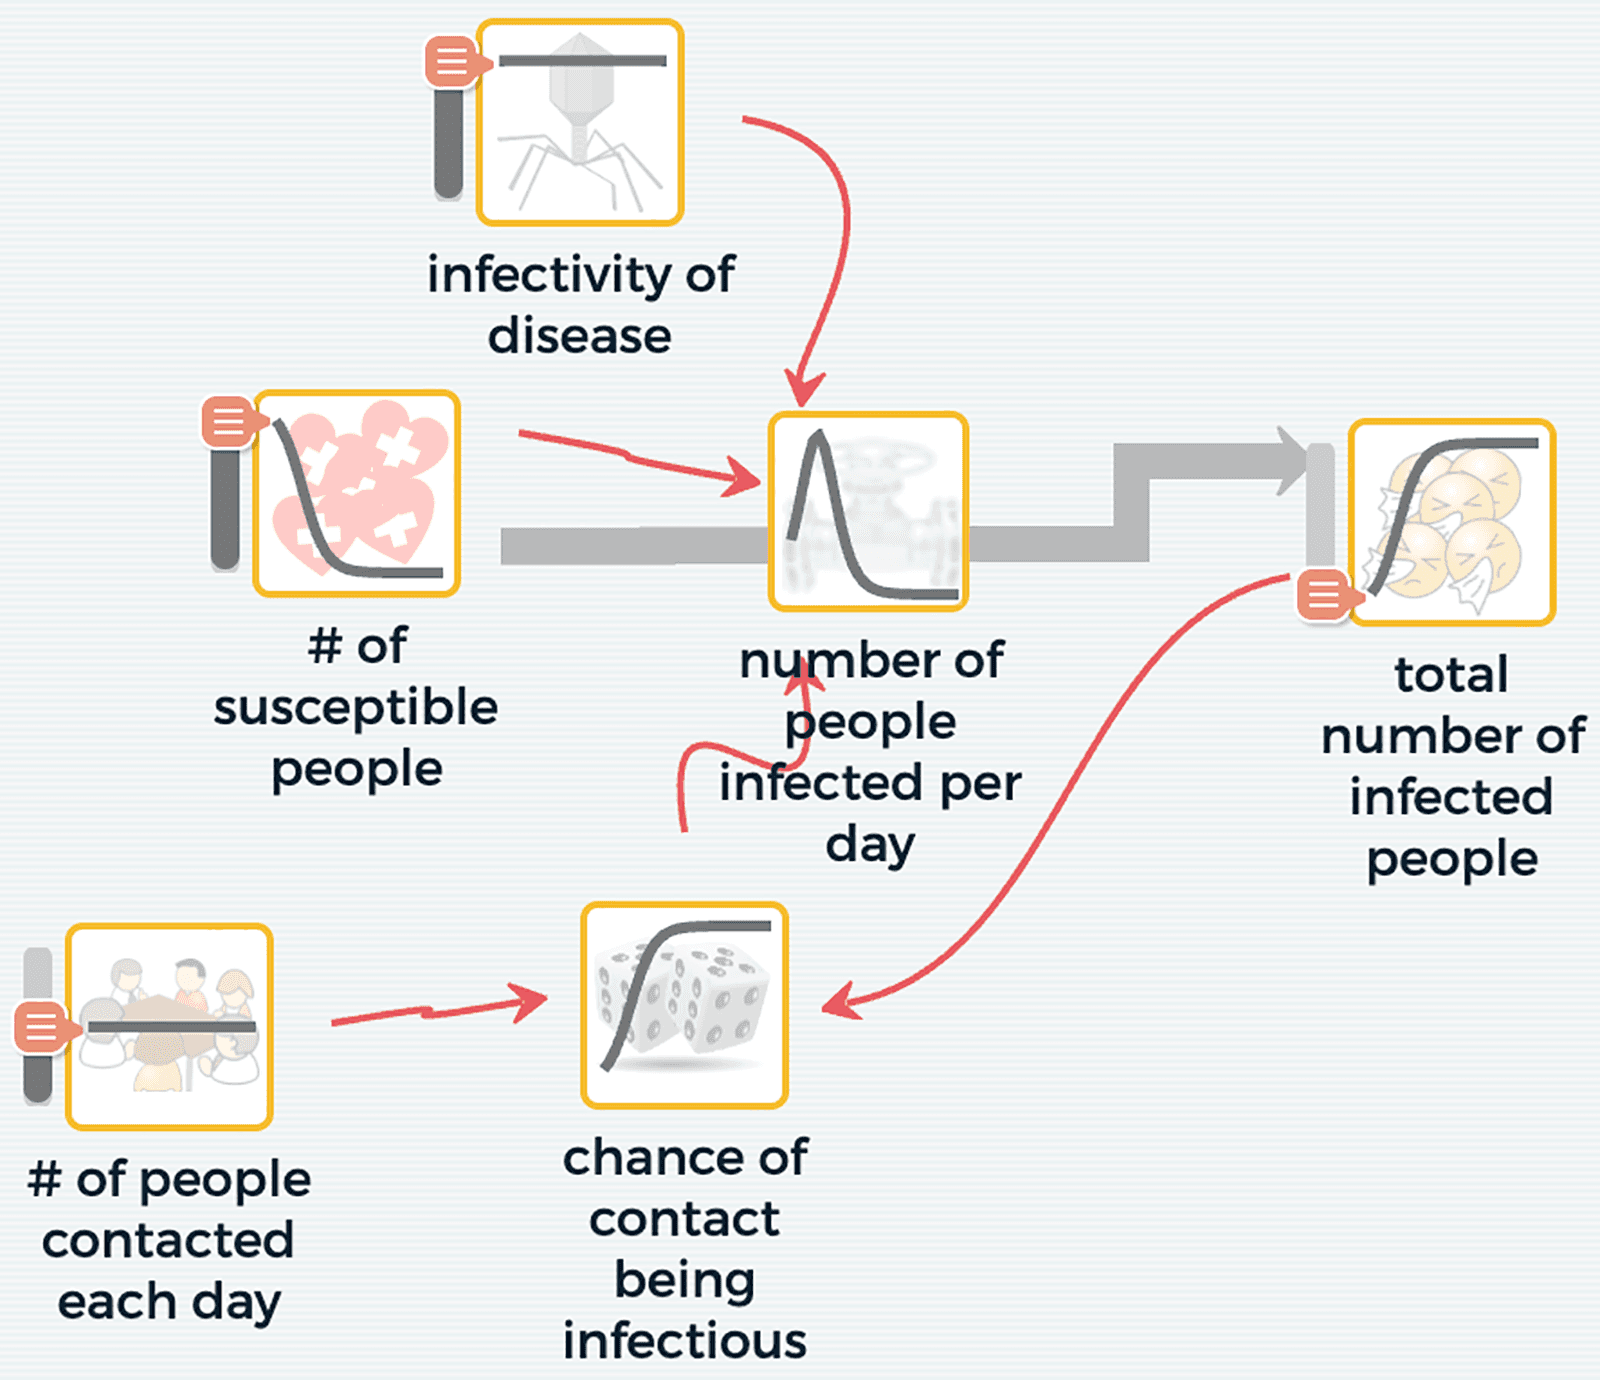 Feedback is added to the system by connecting the total number of infected people to the chance of contact being infectious variable, completing a loop with the number of people infected per day.